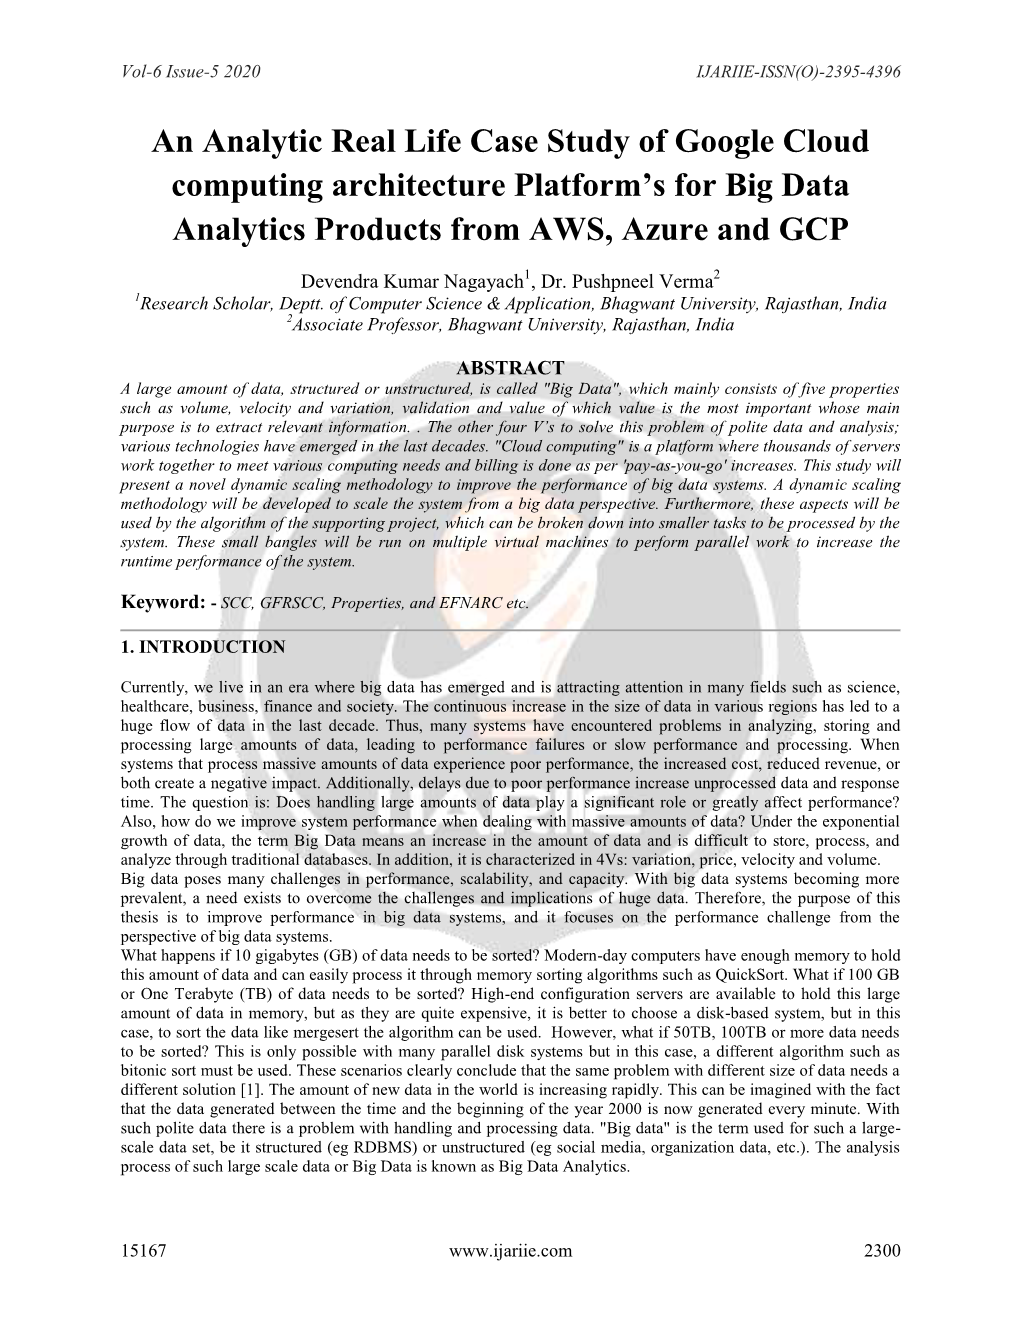 An Analytic Real Life Case Study of Google Cloud Computing Architecture Platform’S for Big Data Analytics Products from AWS, Azure and GCP